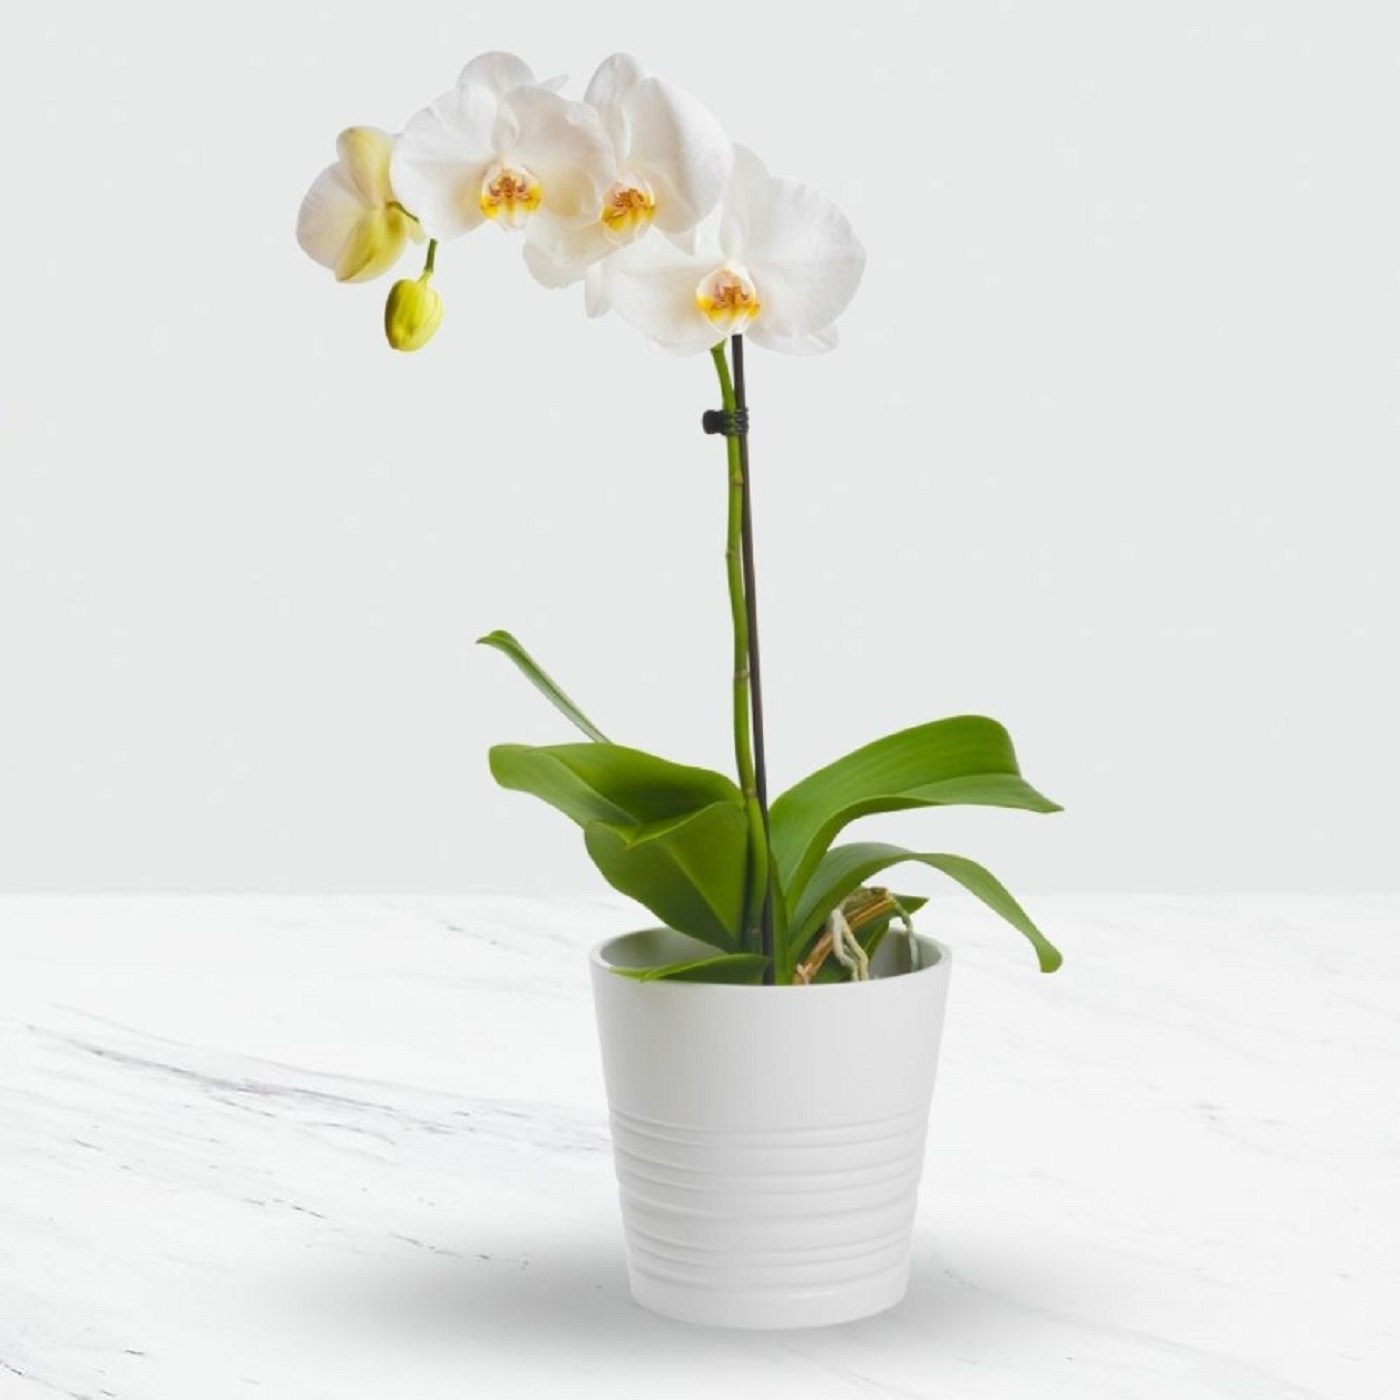 product image for Phalaenopsis orchid in a pot.